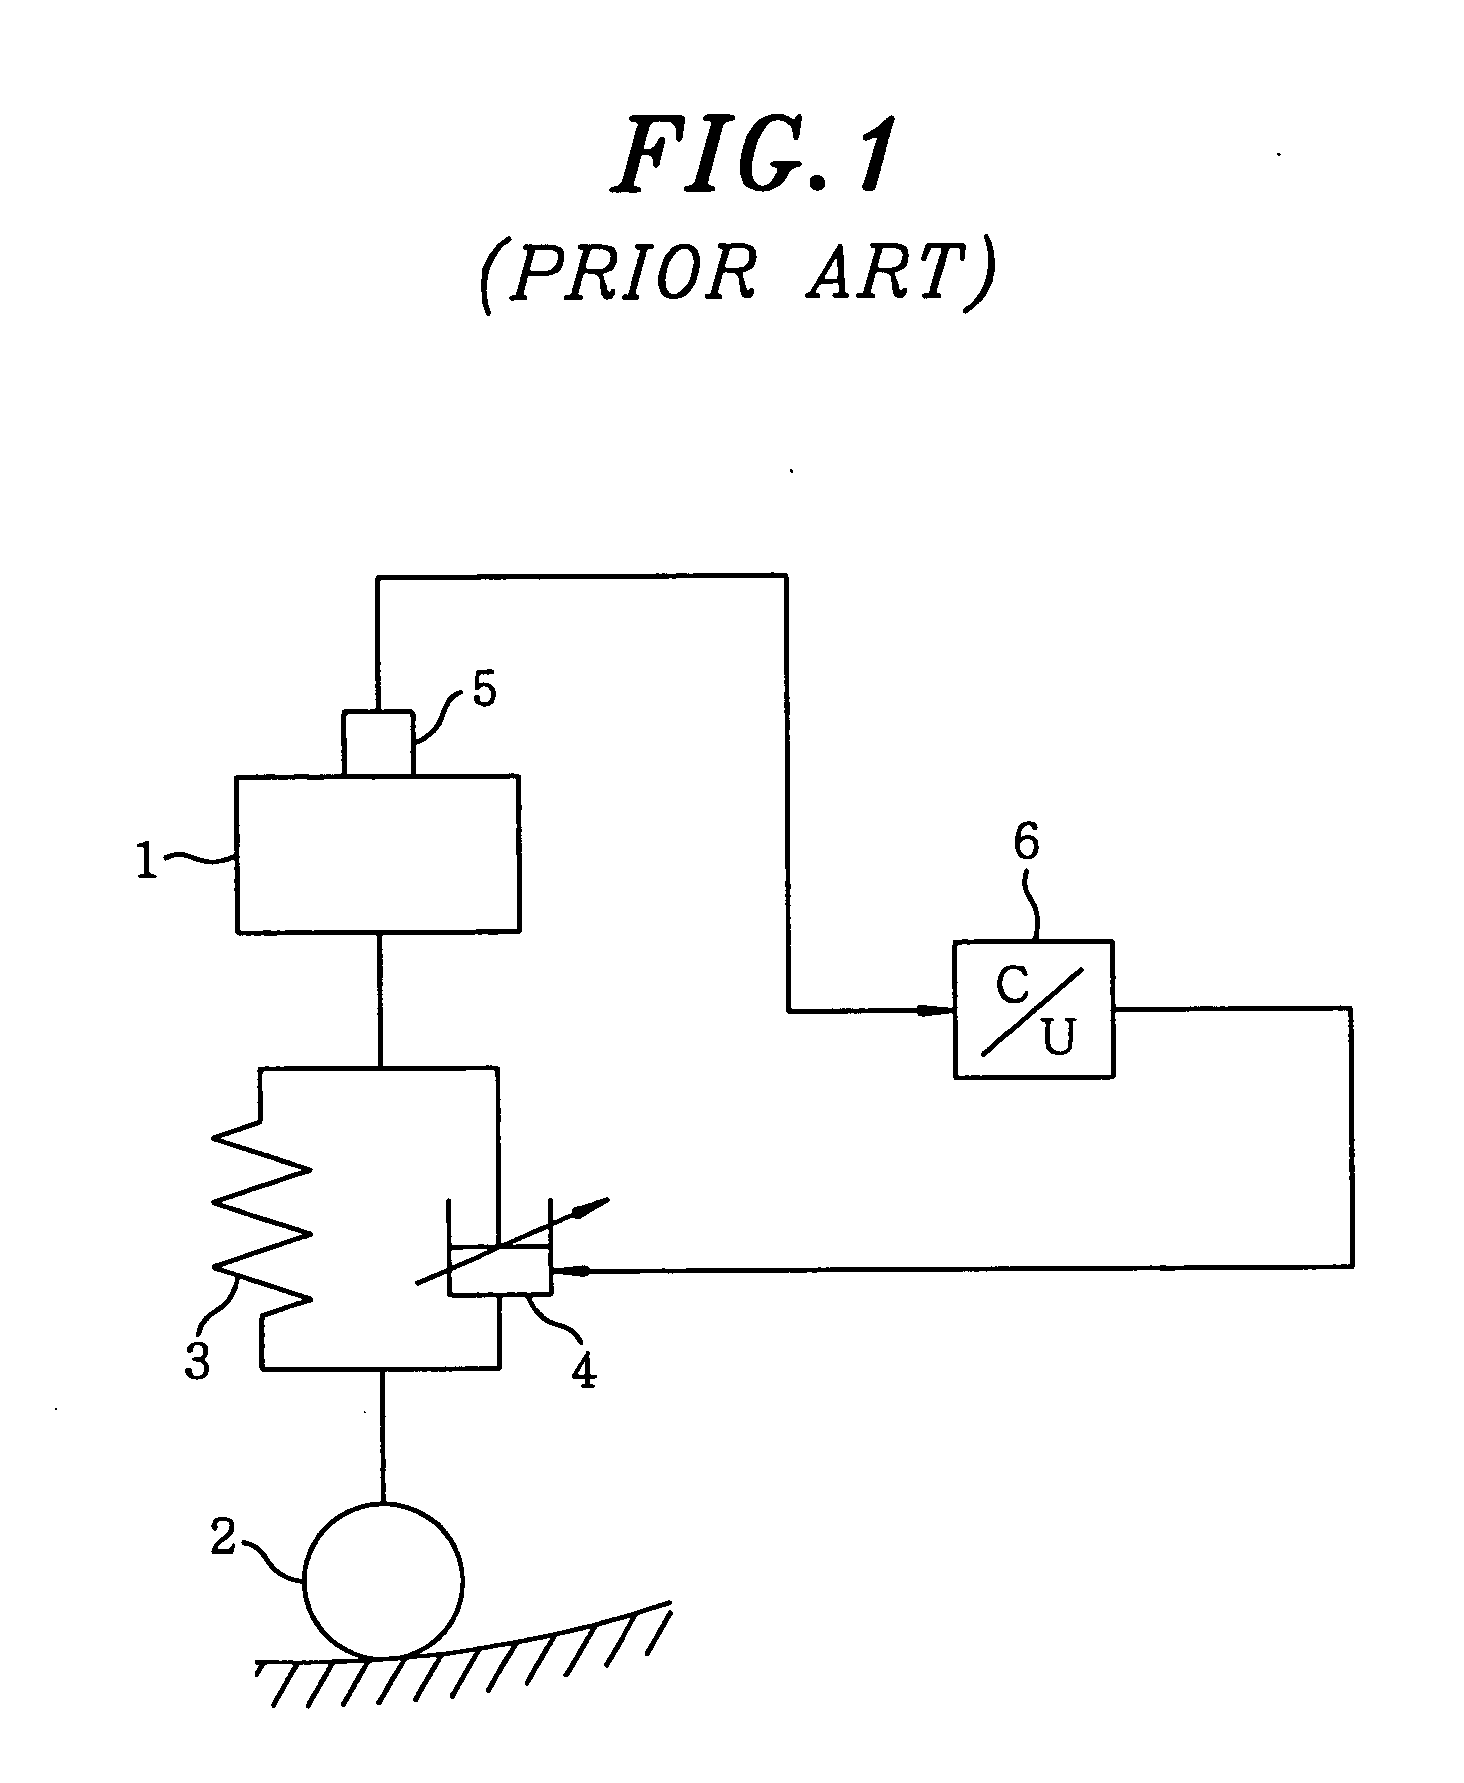 Method for controlling damping force in an electronically-controlled suspension apparatus